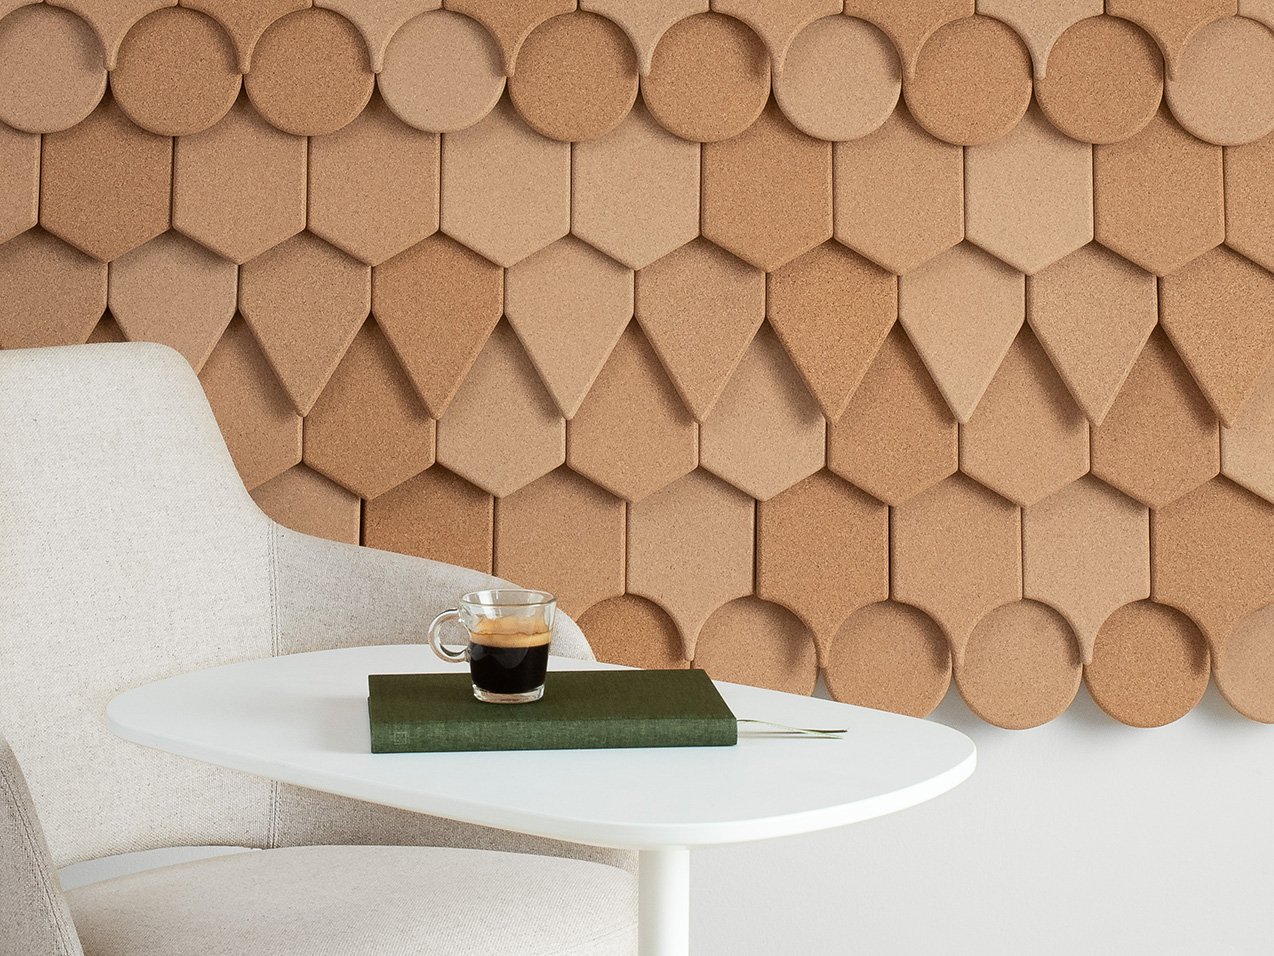 Cobblestone Black Acoustical Cork Wall Tiles with PSA Backing